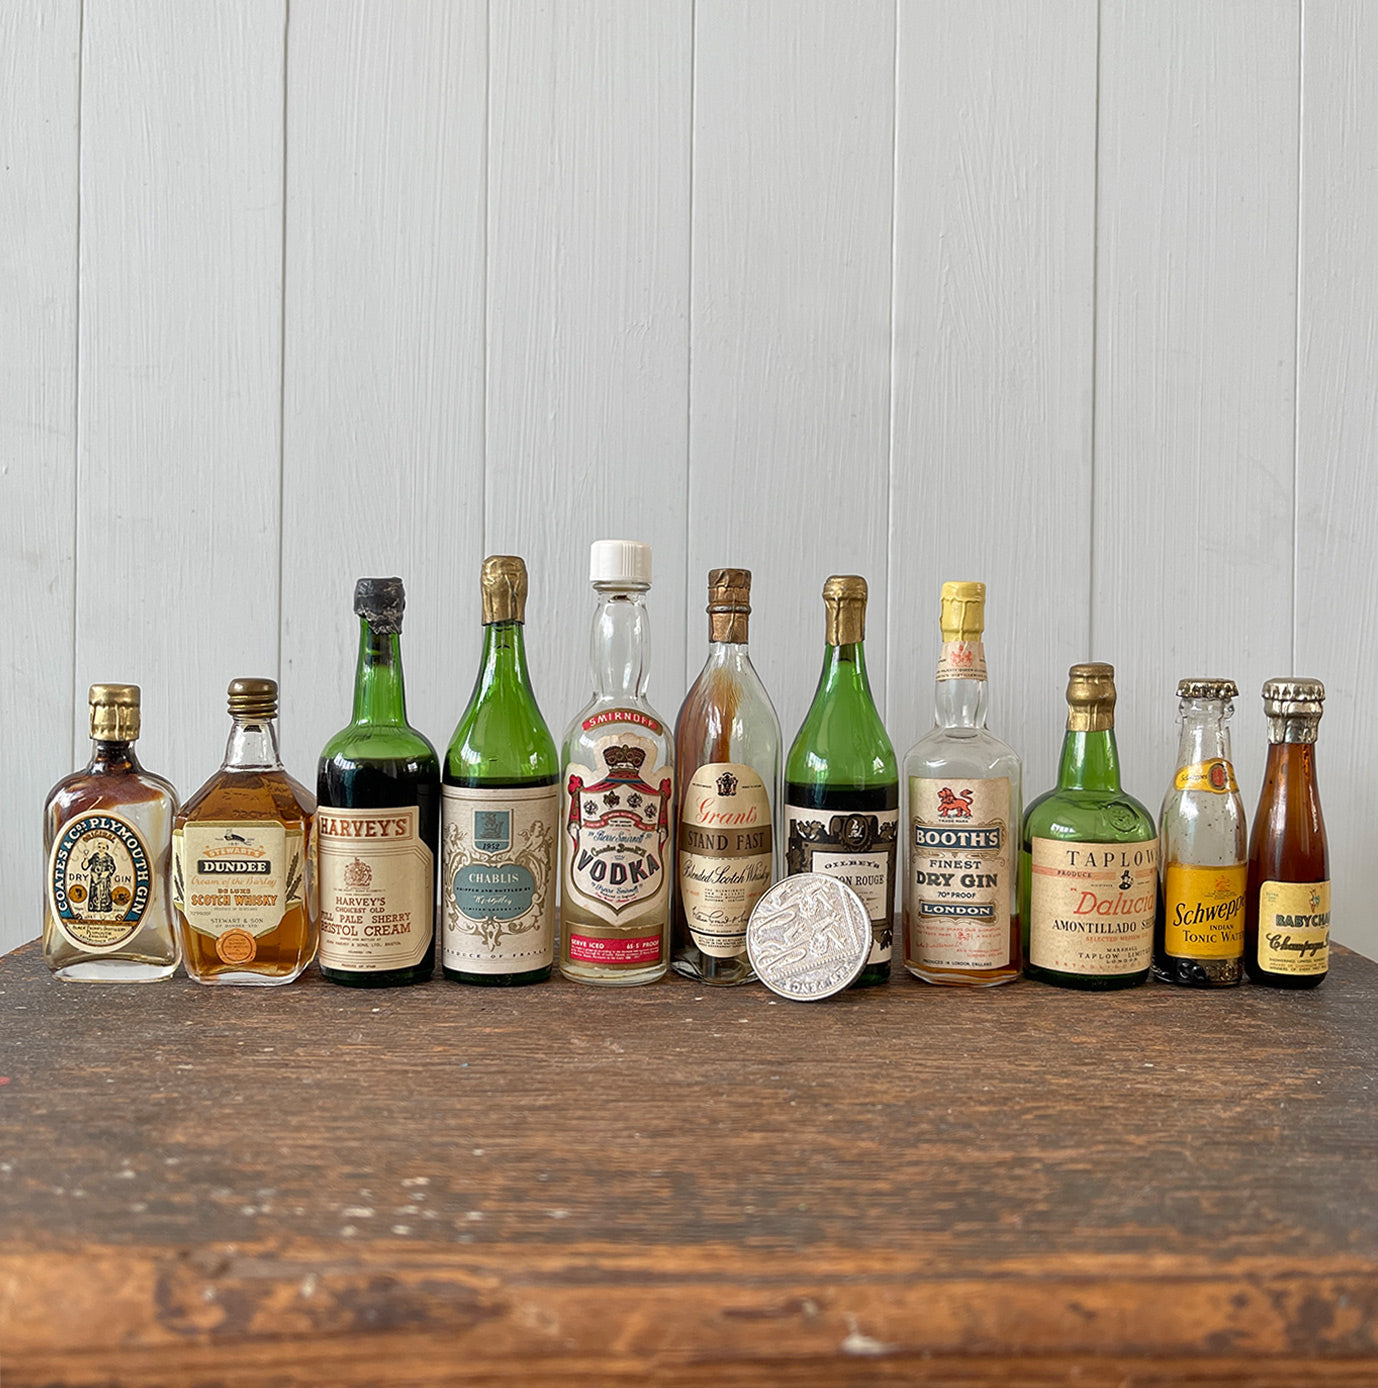 11 mini bottles of vintage Alcohol brands. Not drinkable, but great little display pieces! Brands include Babycham, Smirnoff, Coates & Co, Harvey's, Grants, Booths, Schweppes and Taplow - SHOP NOW - www.intovintage.co.uk